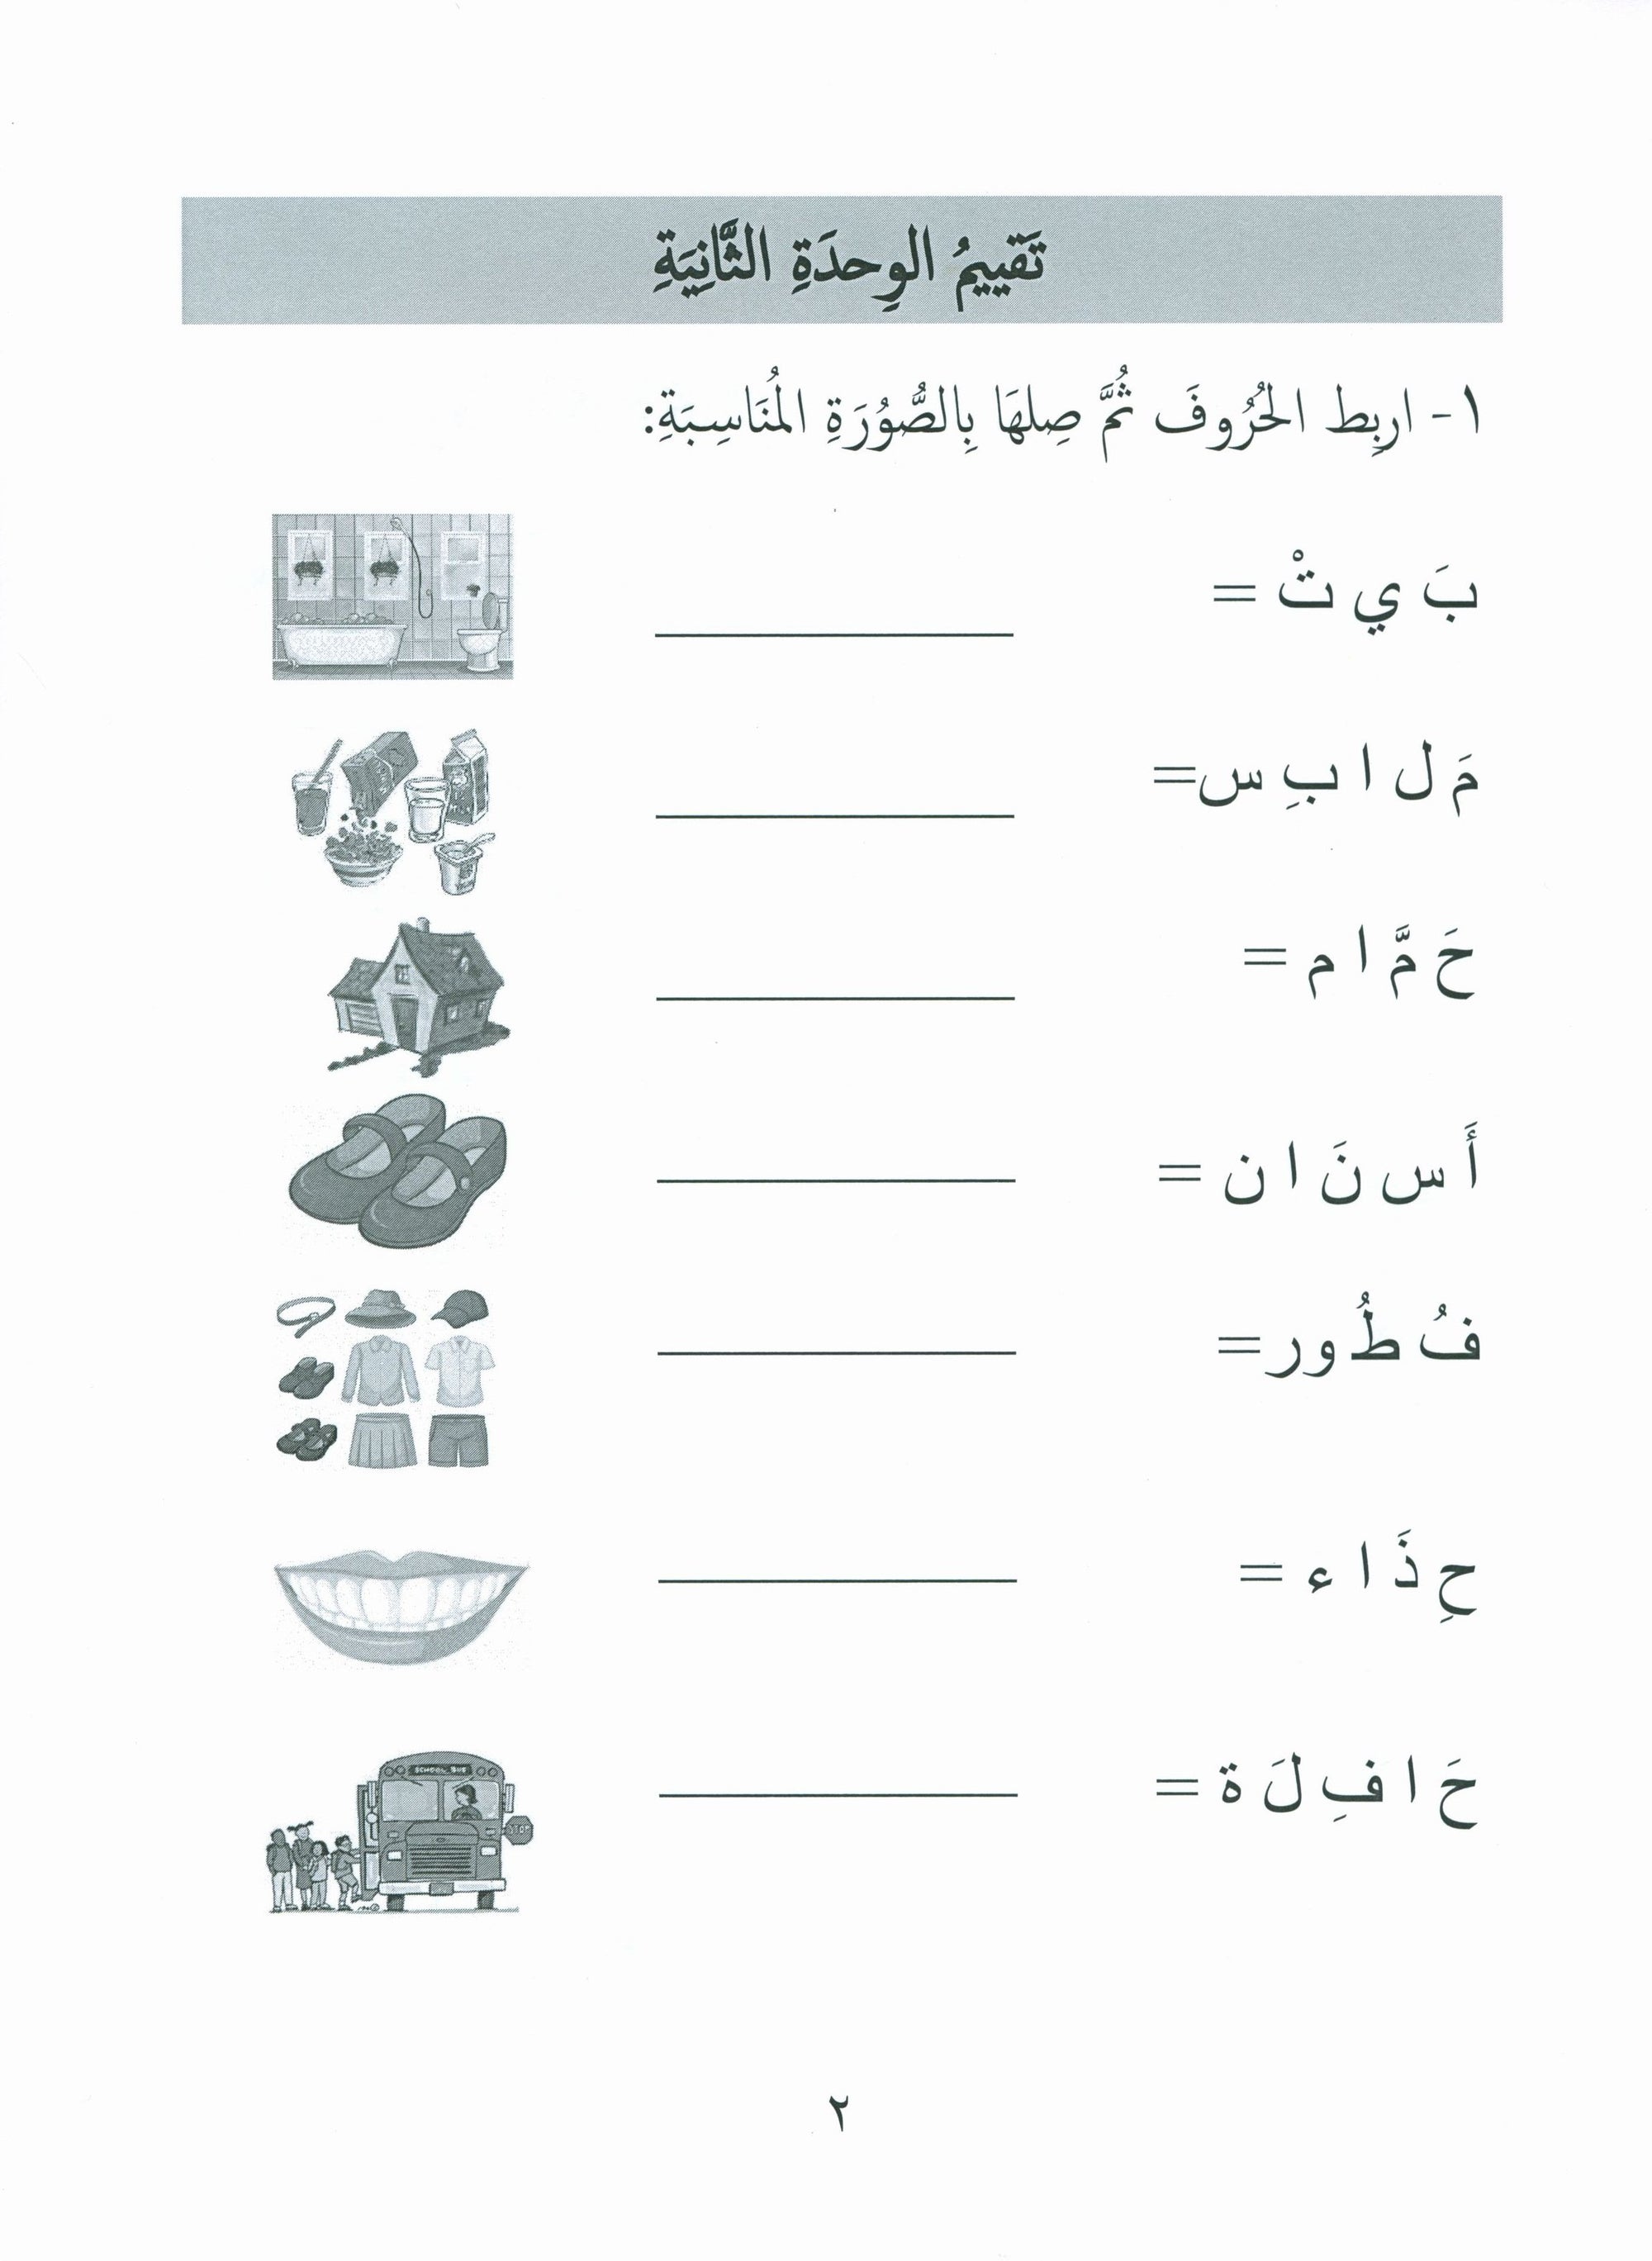 Our Language Is Our Pride Assessment Level 1 لغتنا فخرنا